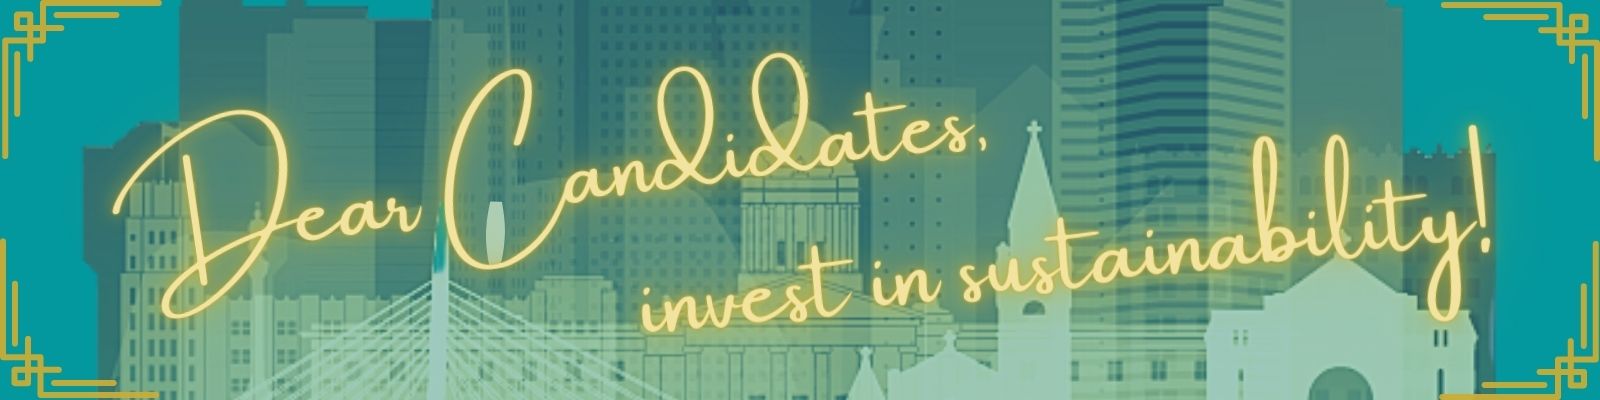 Dear Candidates, invest in sustainability